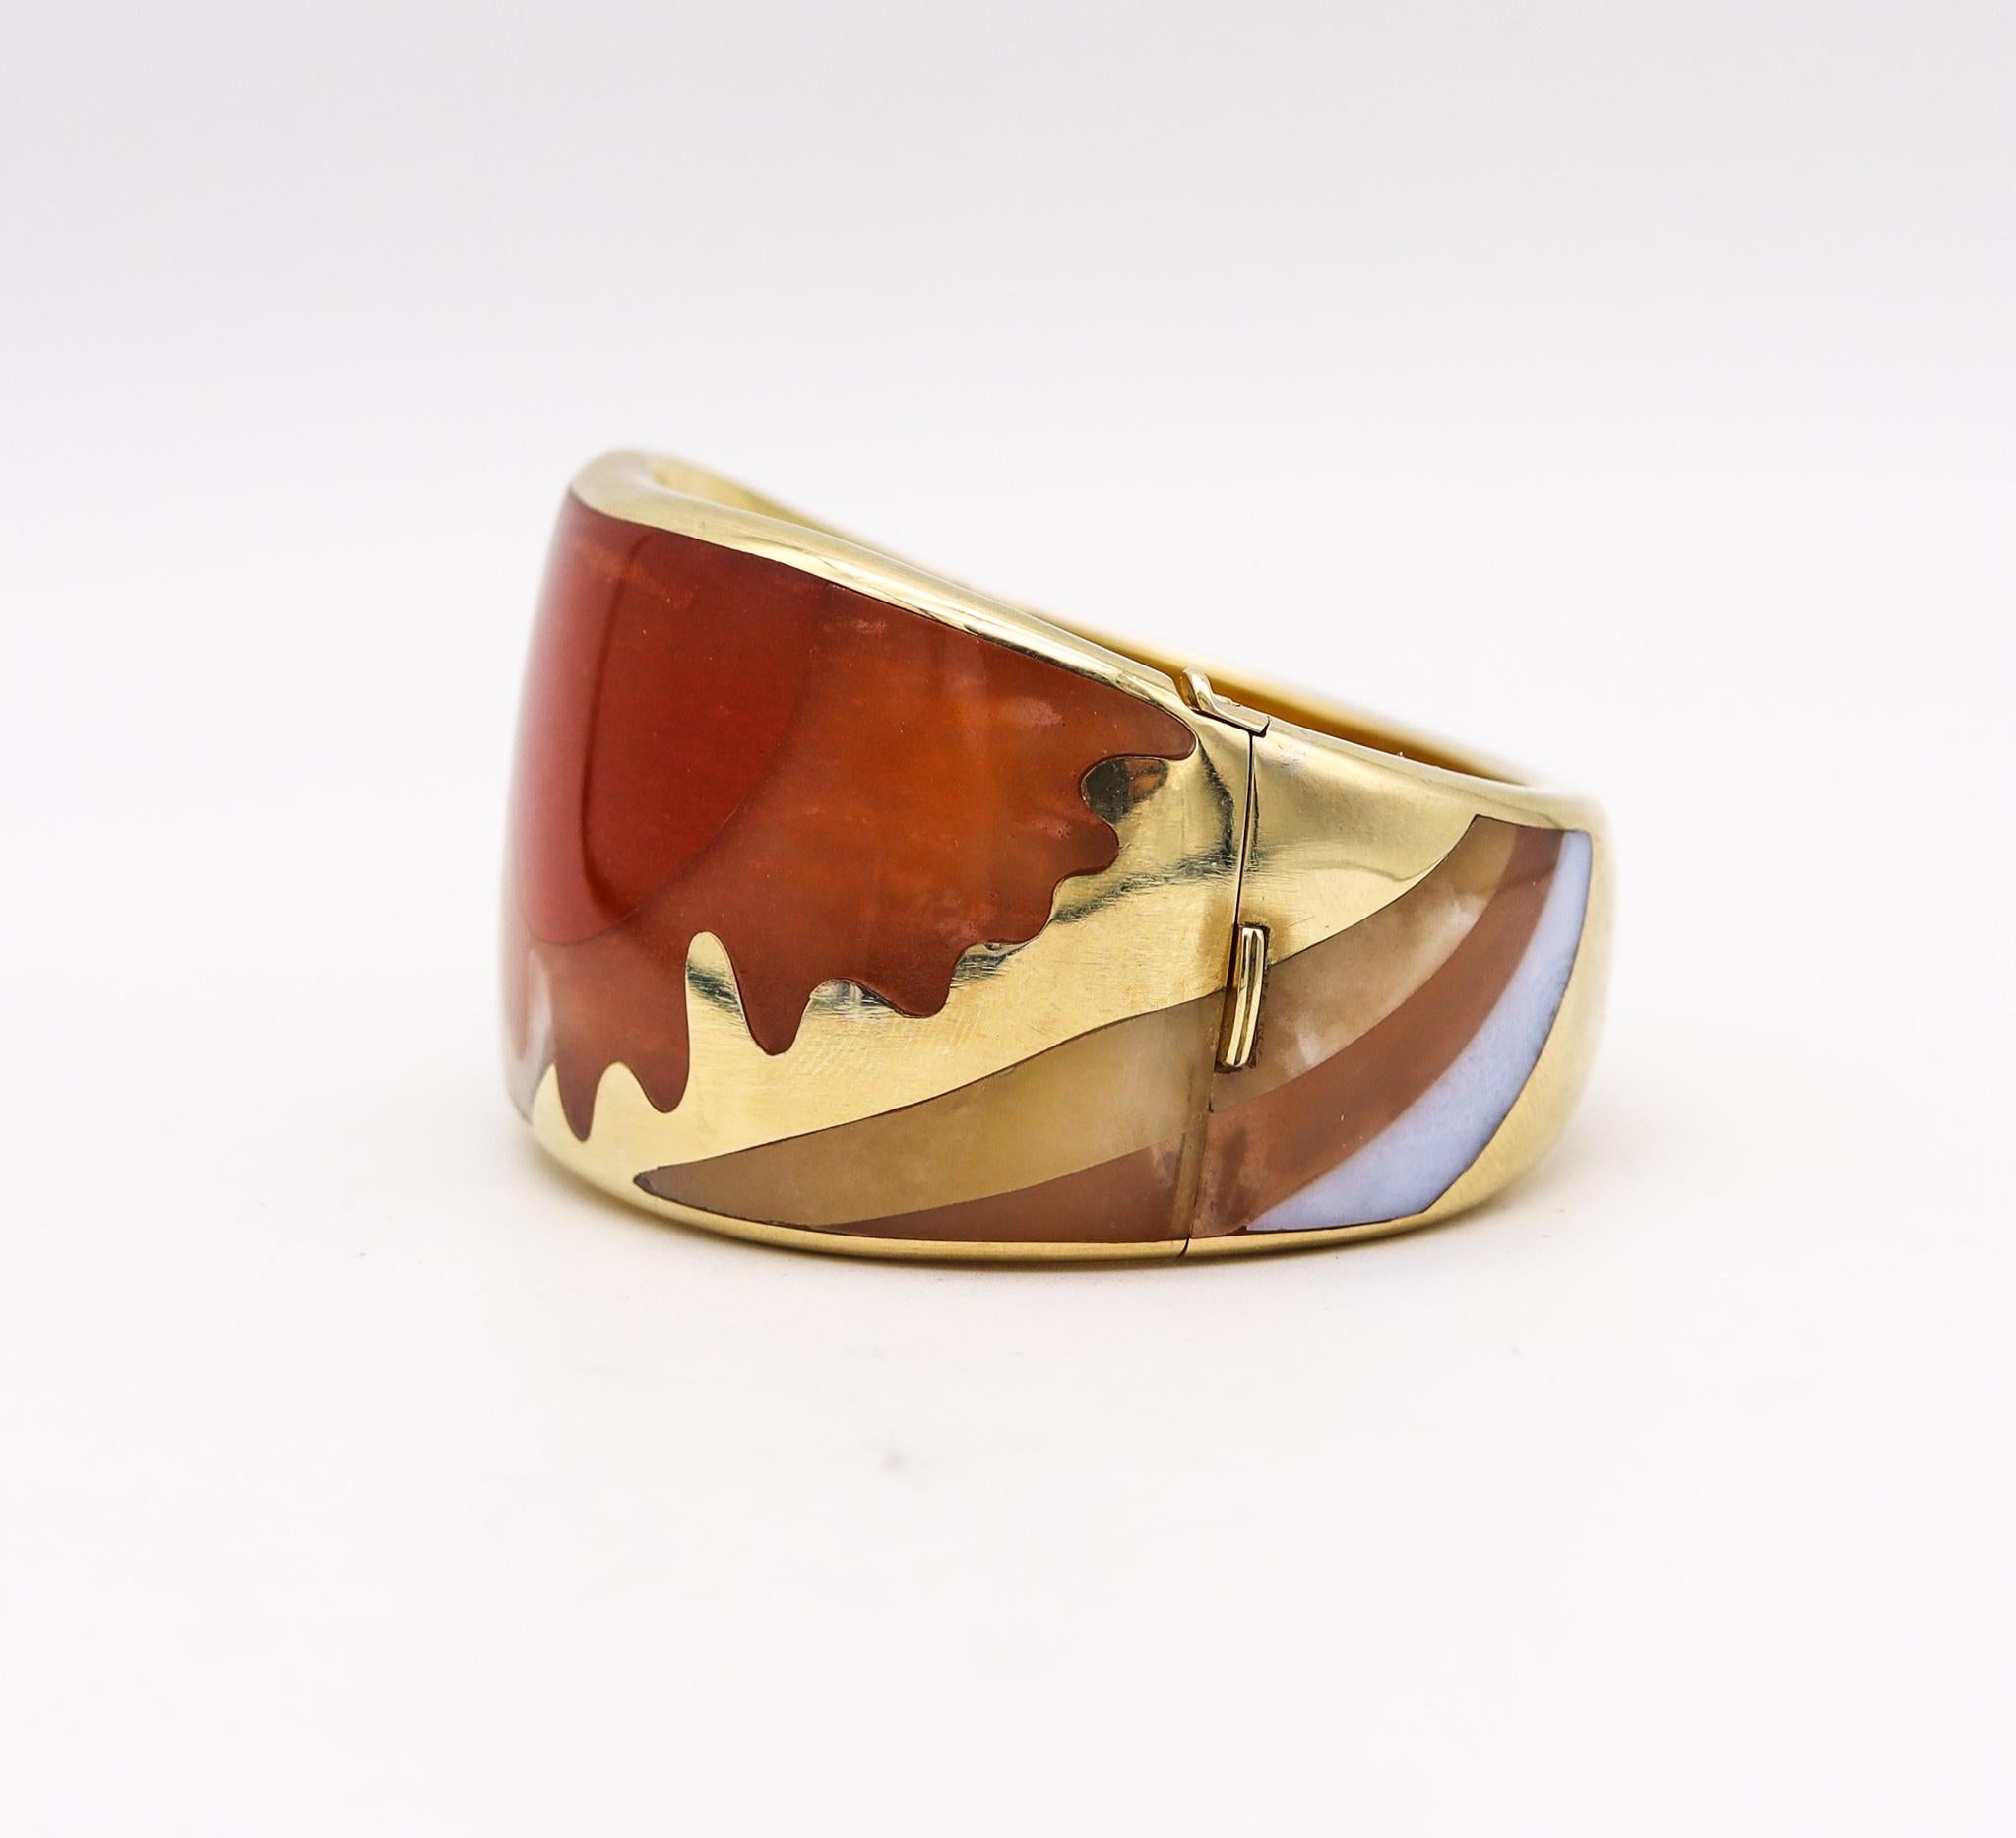 Modernist Tiffany & Co 1977 Angela Cummings Abstracts Bangle 18kt Gold with Inlaid Agates For Sale